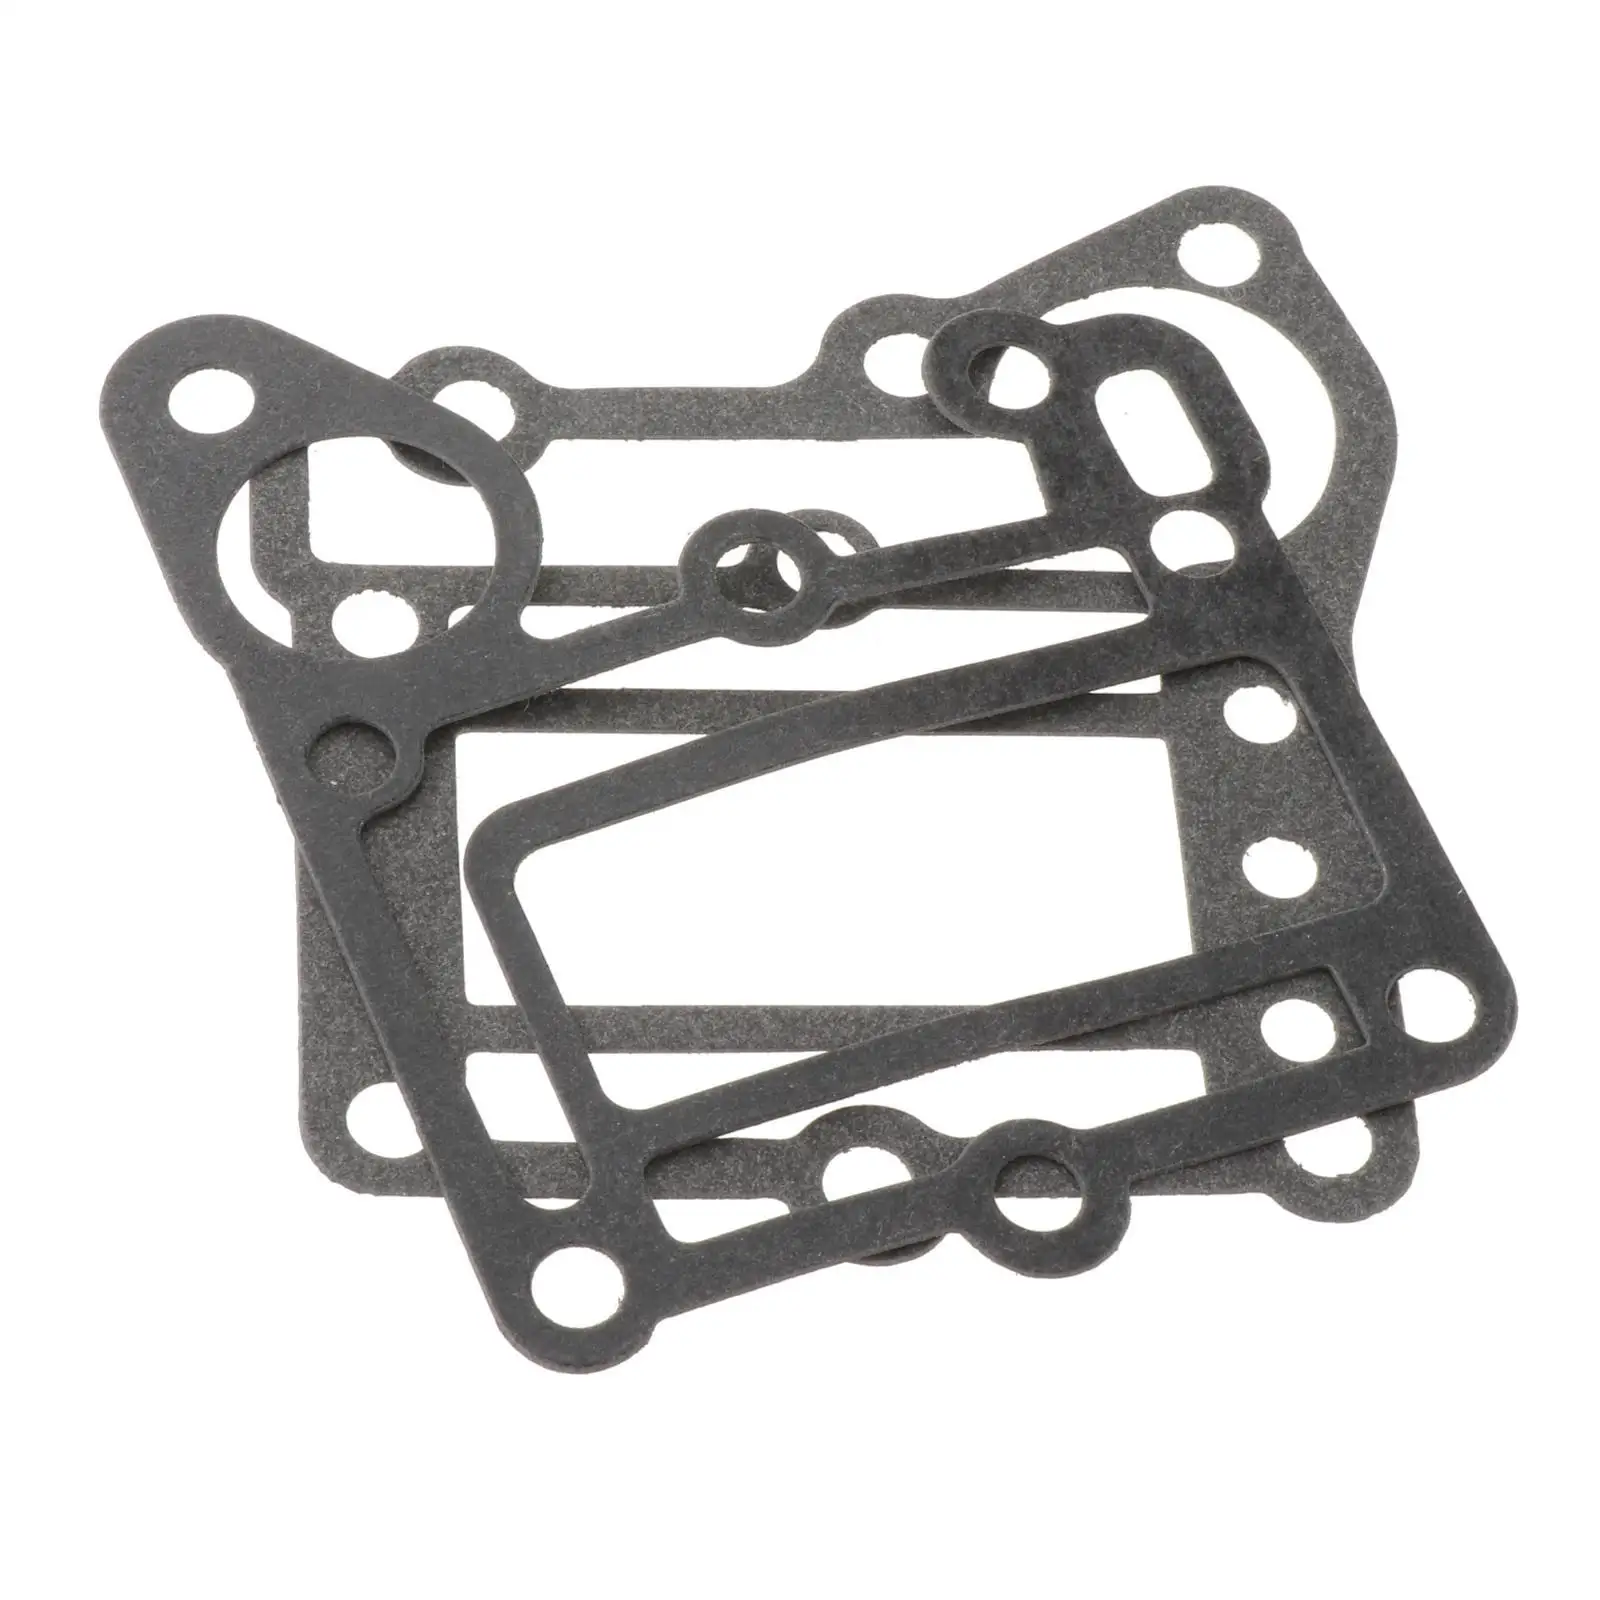 2 Pieces Exhaust Jacket Gaskets 6E0-411 6E0-41114-A0 Outboard Motors for